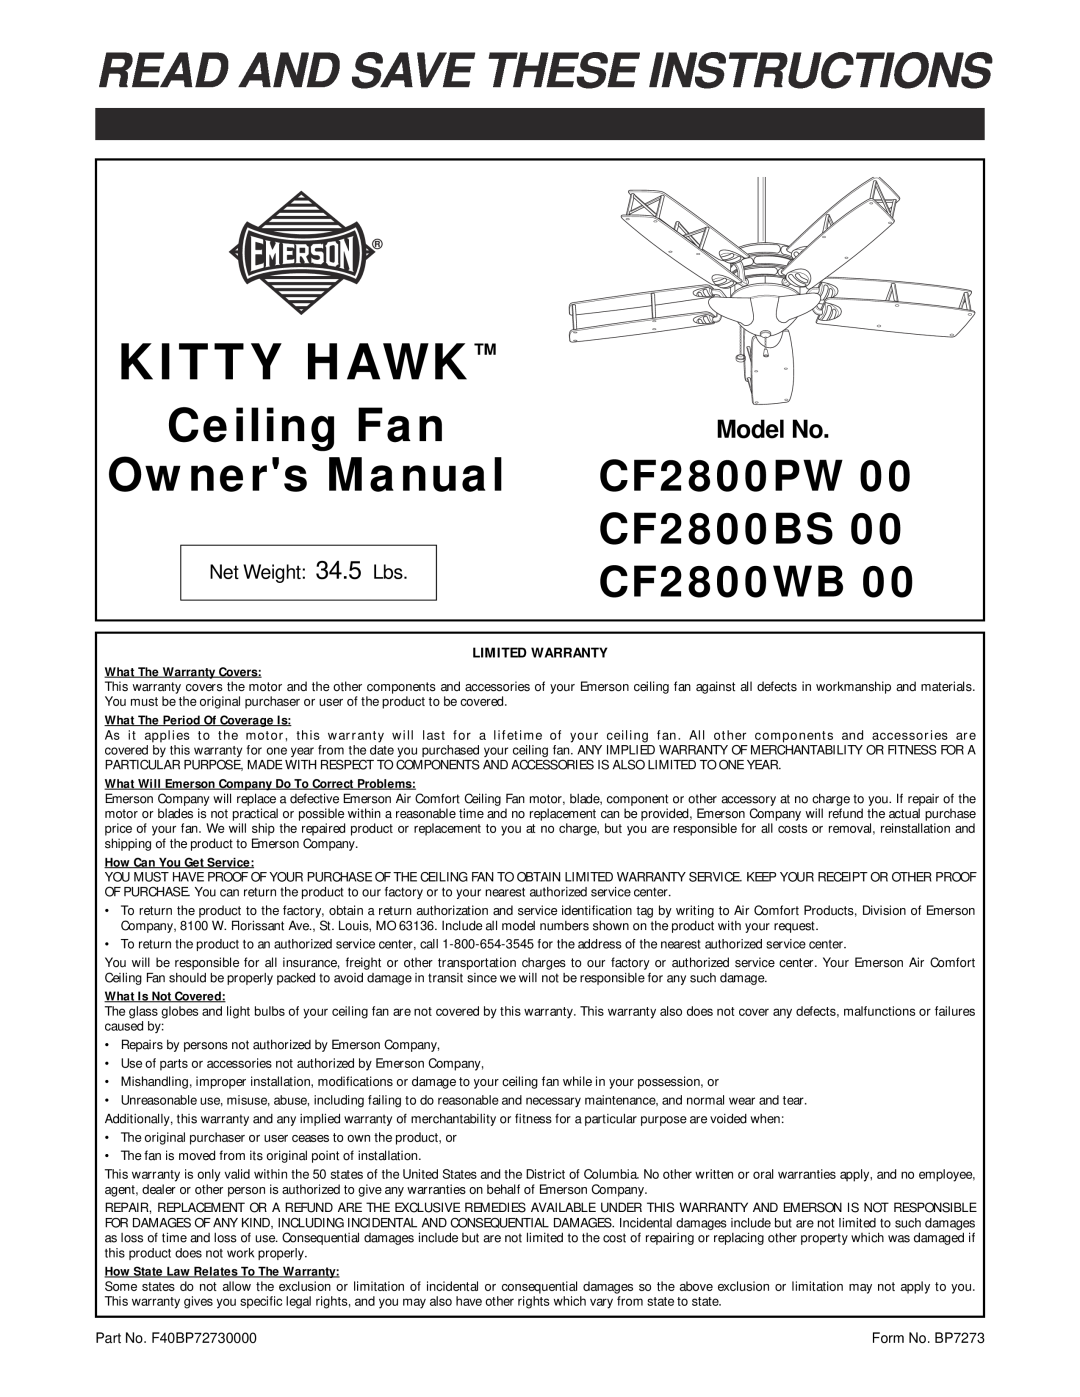 Emerson CF2800WB warranty Model No, Kitty Hawk, Read And Save These Instructions, Ceiling Fan, CF2800PW, CF2800BS 